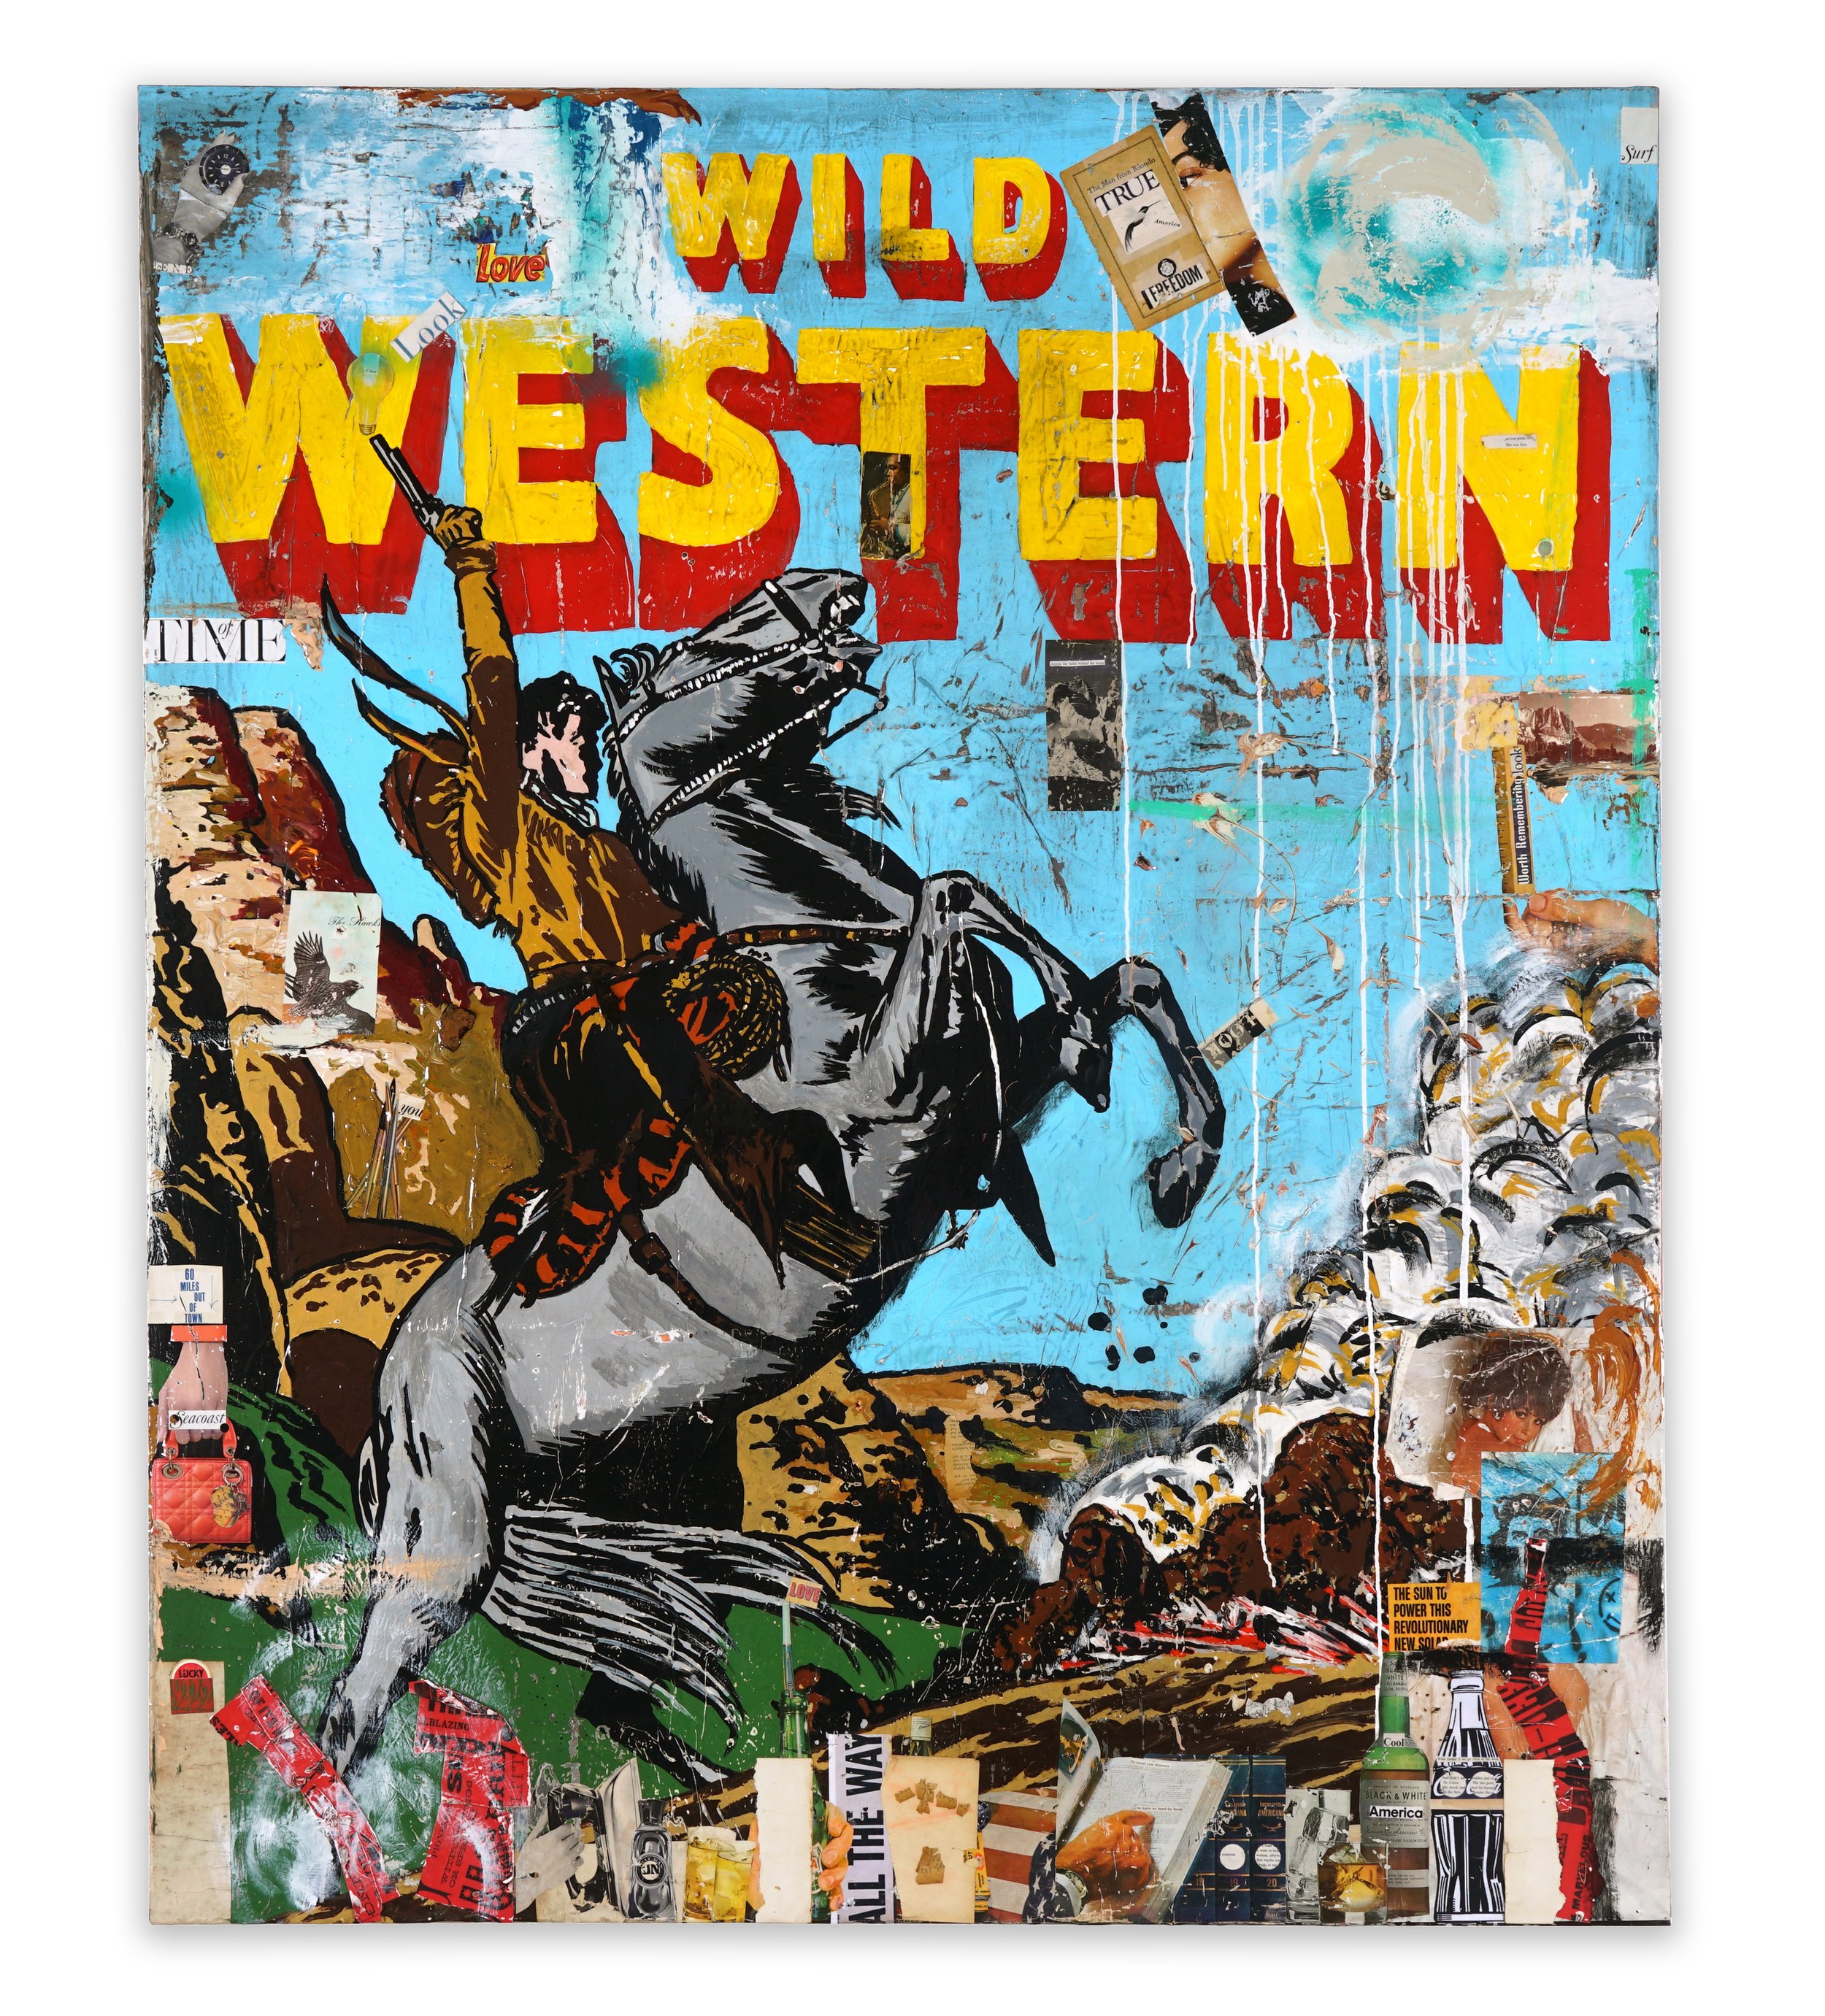 Greg Miller, Wild Western, acrylic and collage on canvas, 72” x 60”